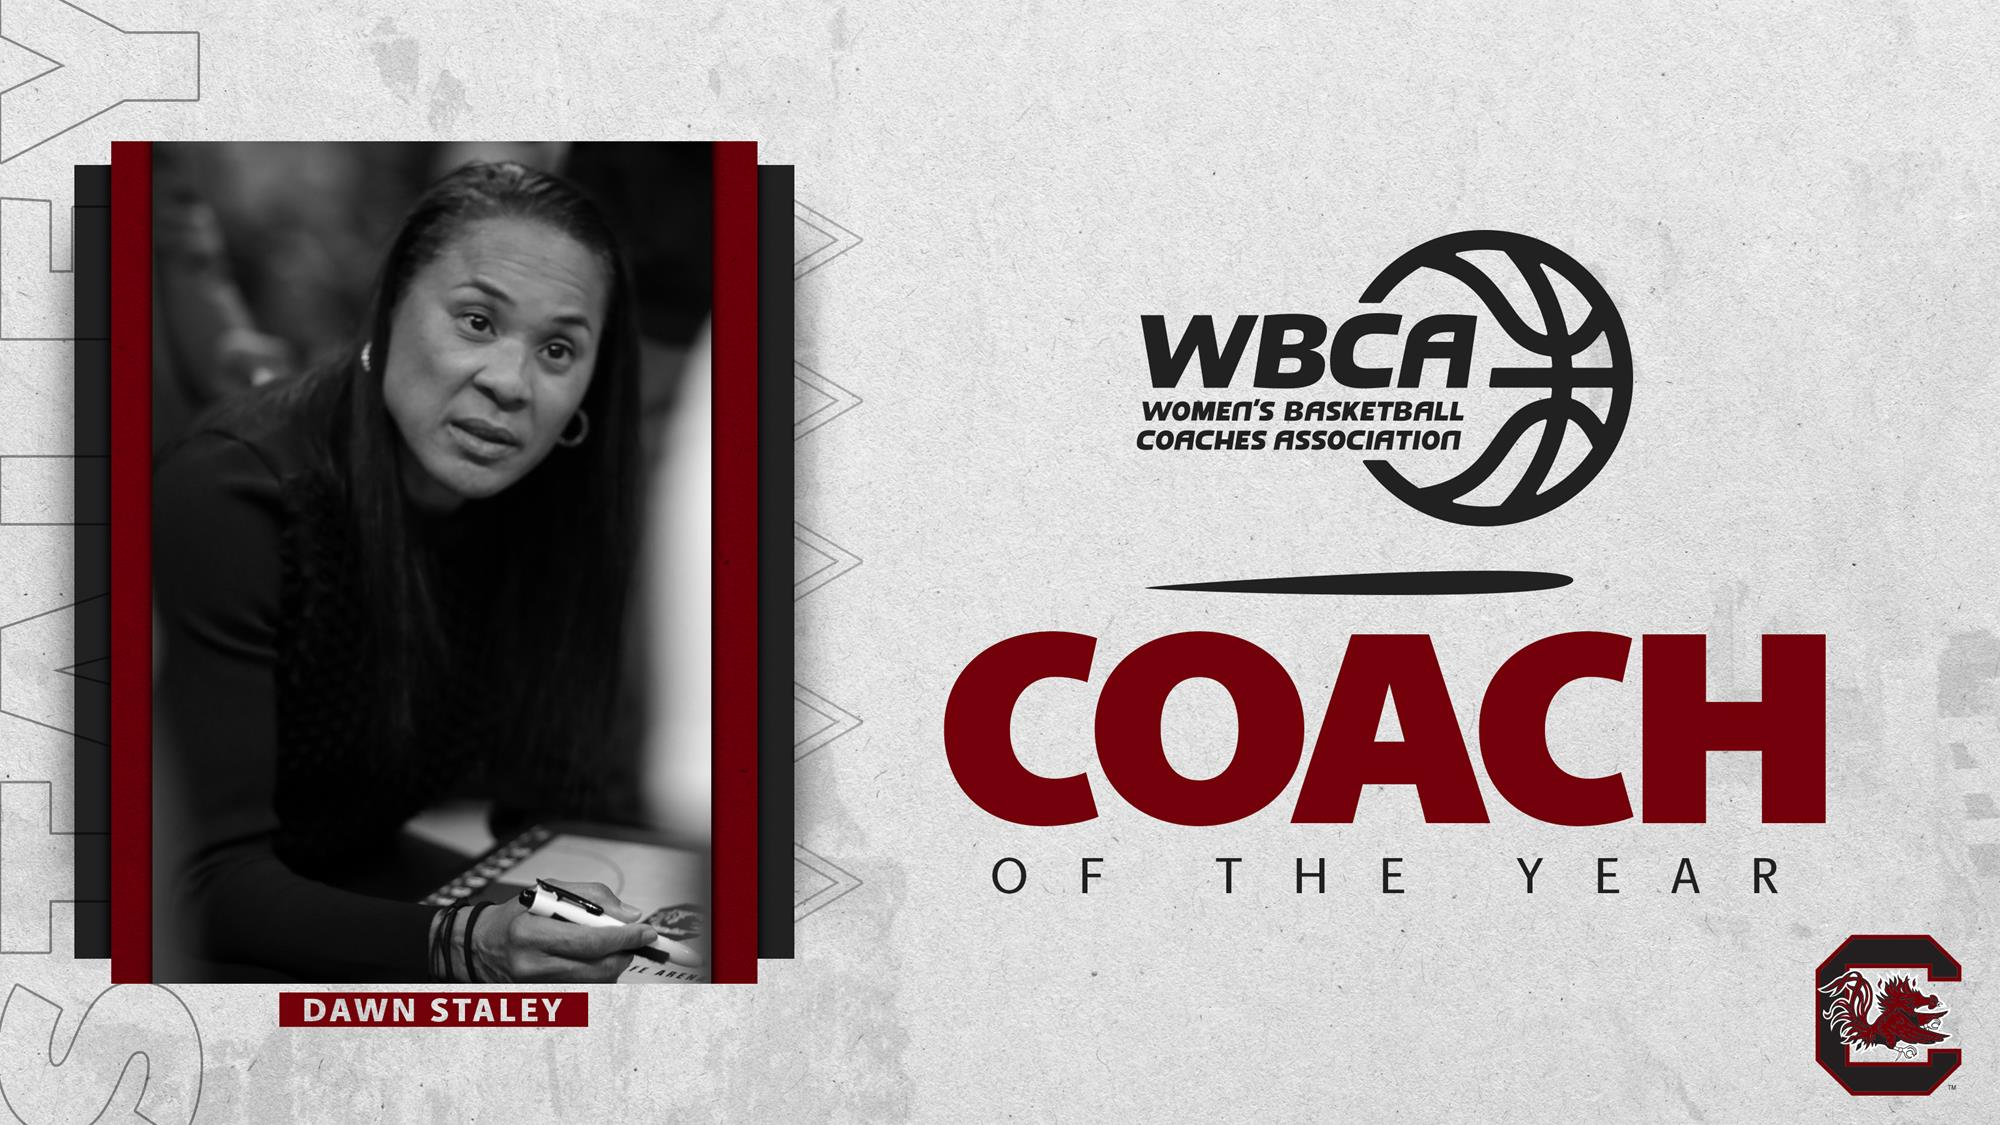 WBCA Taps Staley as National Coach of the Year